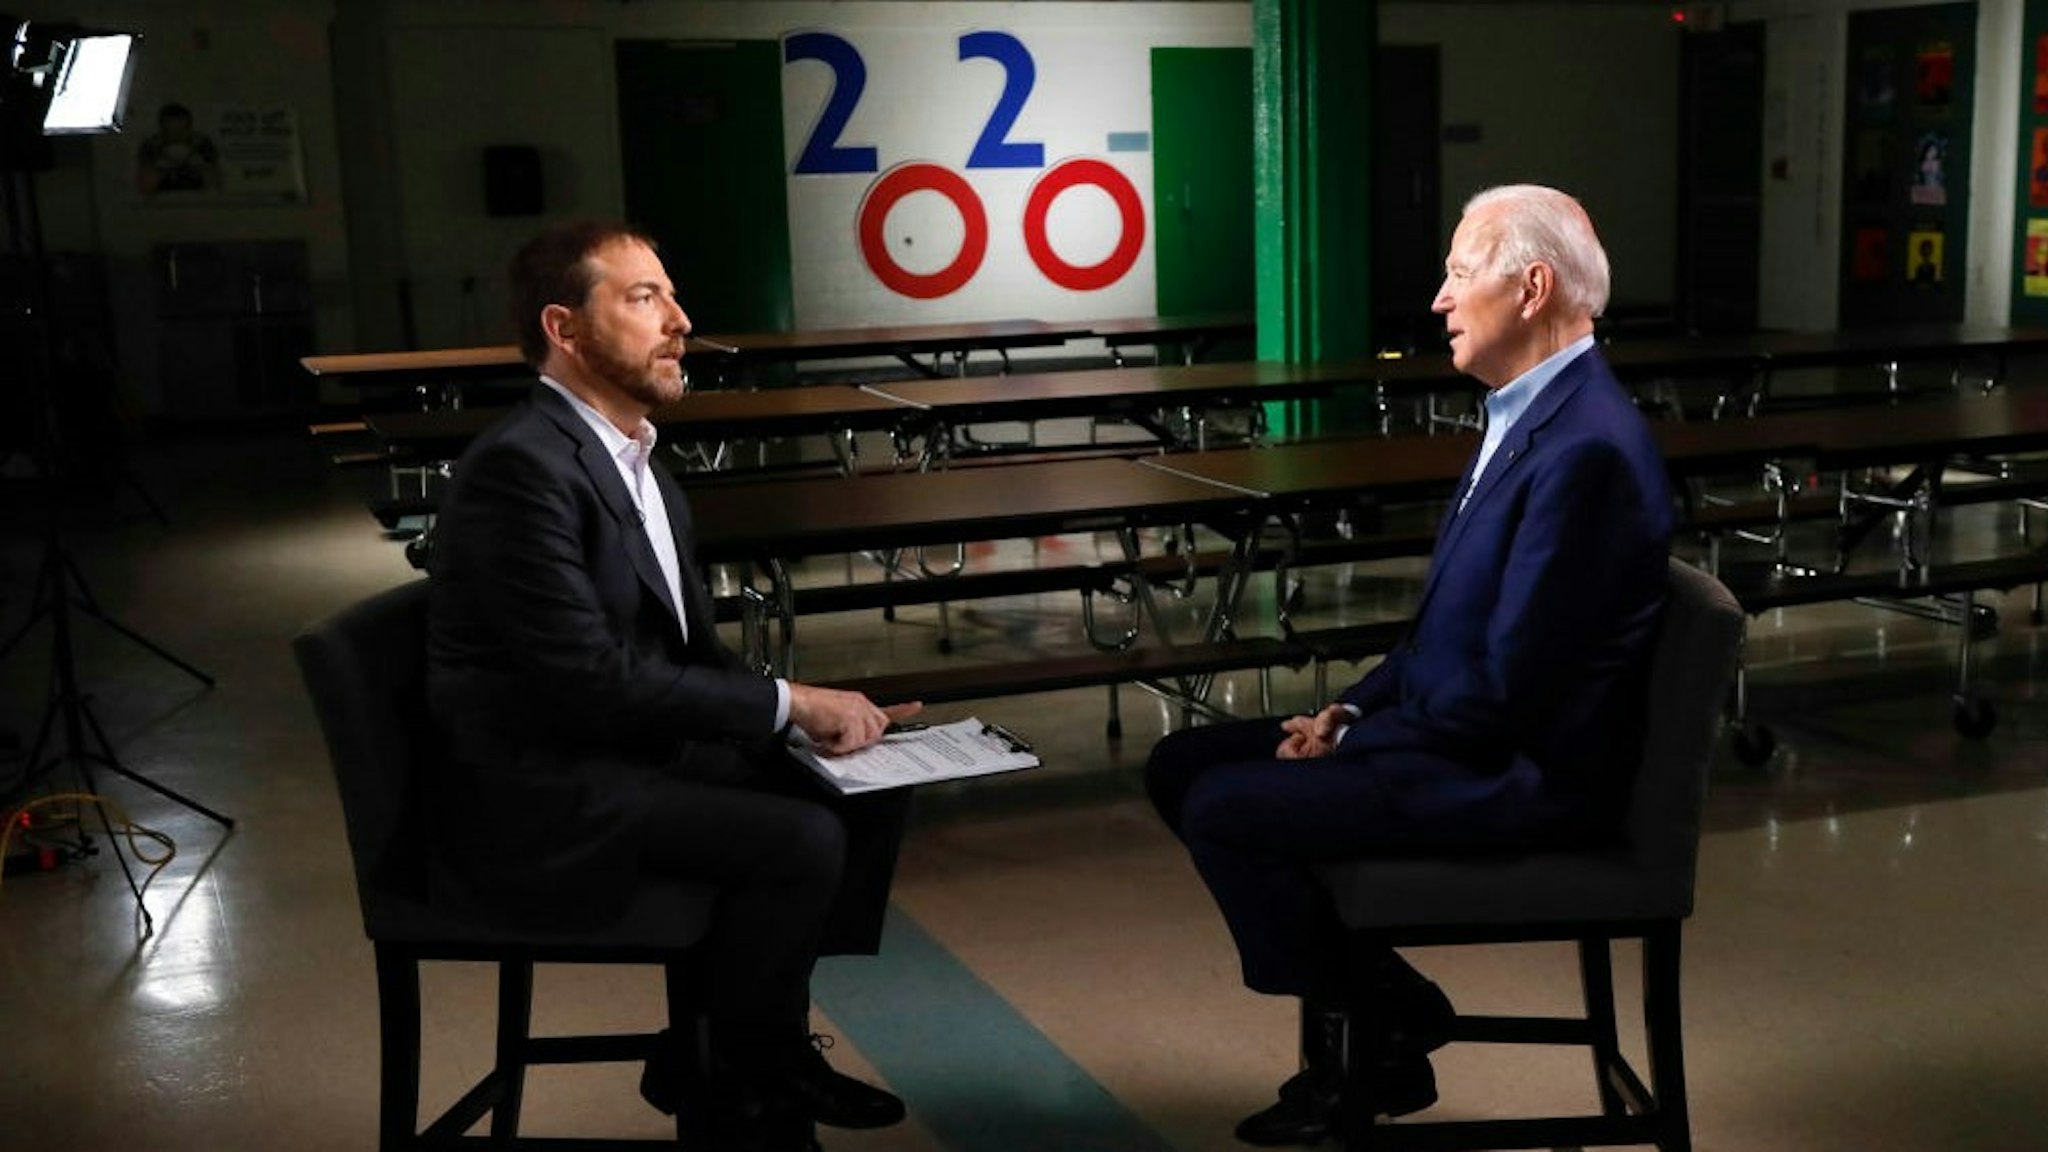 MEET THE PRESS -- Pictured: (l-r) Moderator Chuck Todd and FMR VP. Joe Biden (D) appear in a pre-taped interview on ?Meet the Press" at O Knudson Middle School in Las Vegas, NV on Saturday, Feb. 15, 2020 - (Photo by: